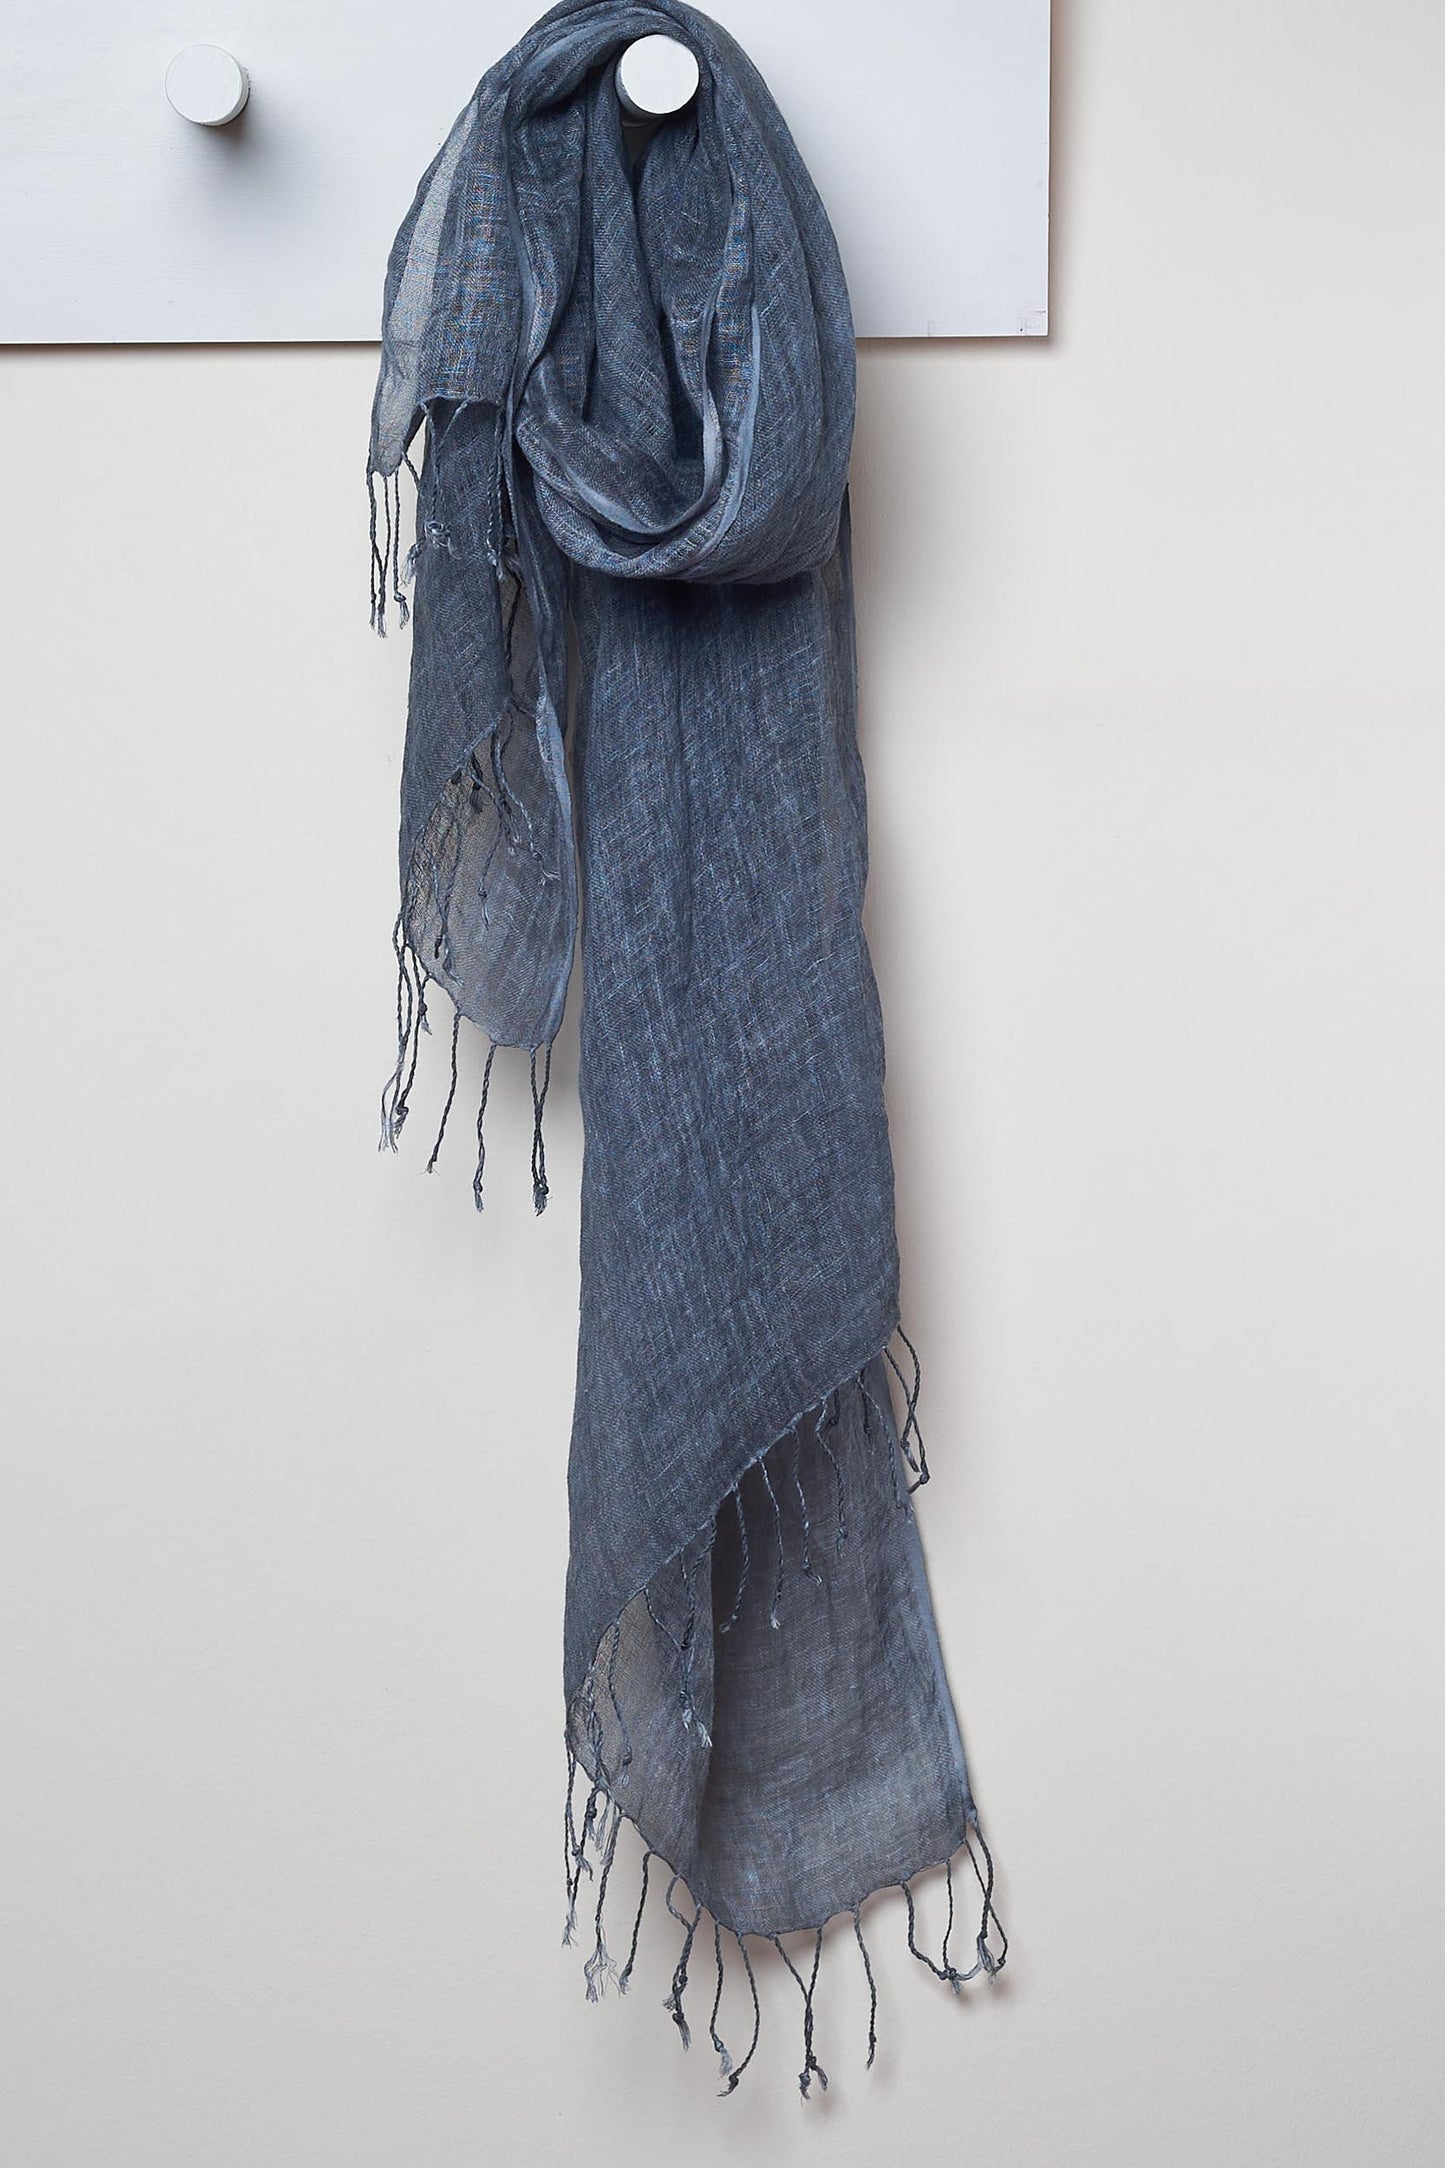 3 Visits To Cairo pure linen scarf in Graphite. looped around a hook detailing the linen texture and thin tassels tied at the short edges of the scarf.